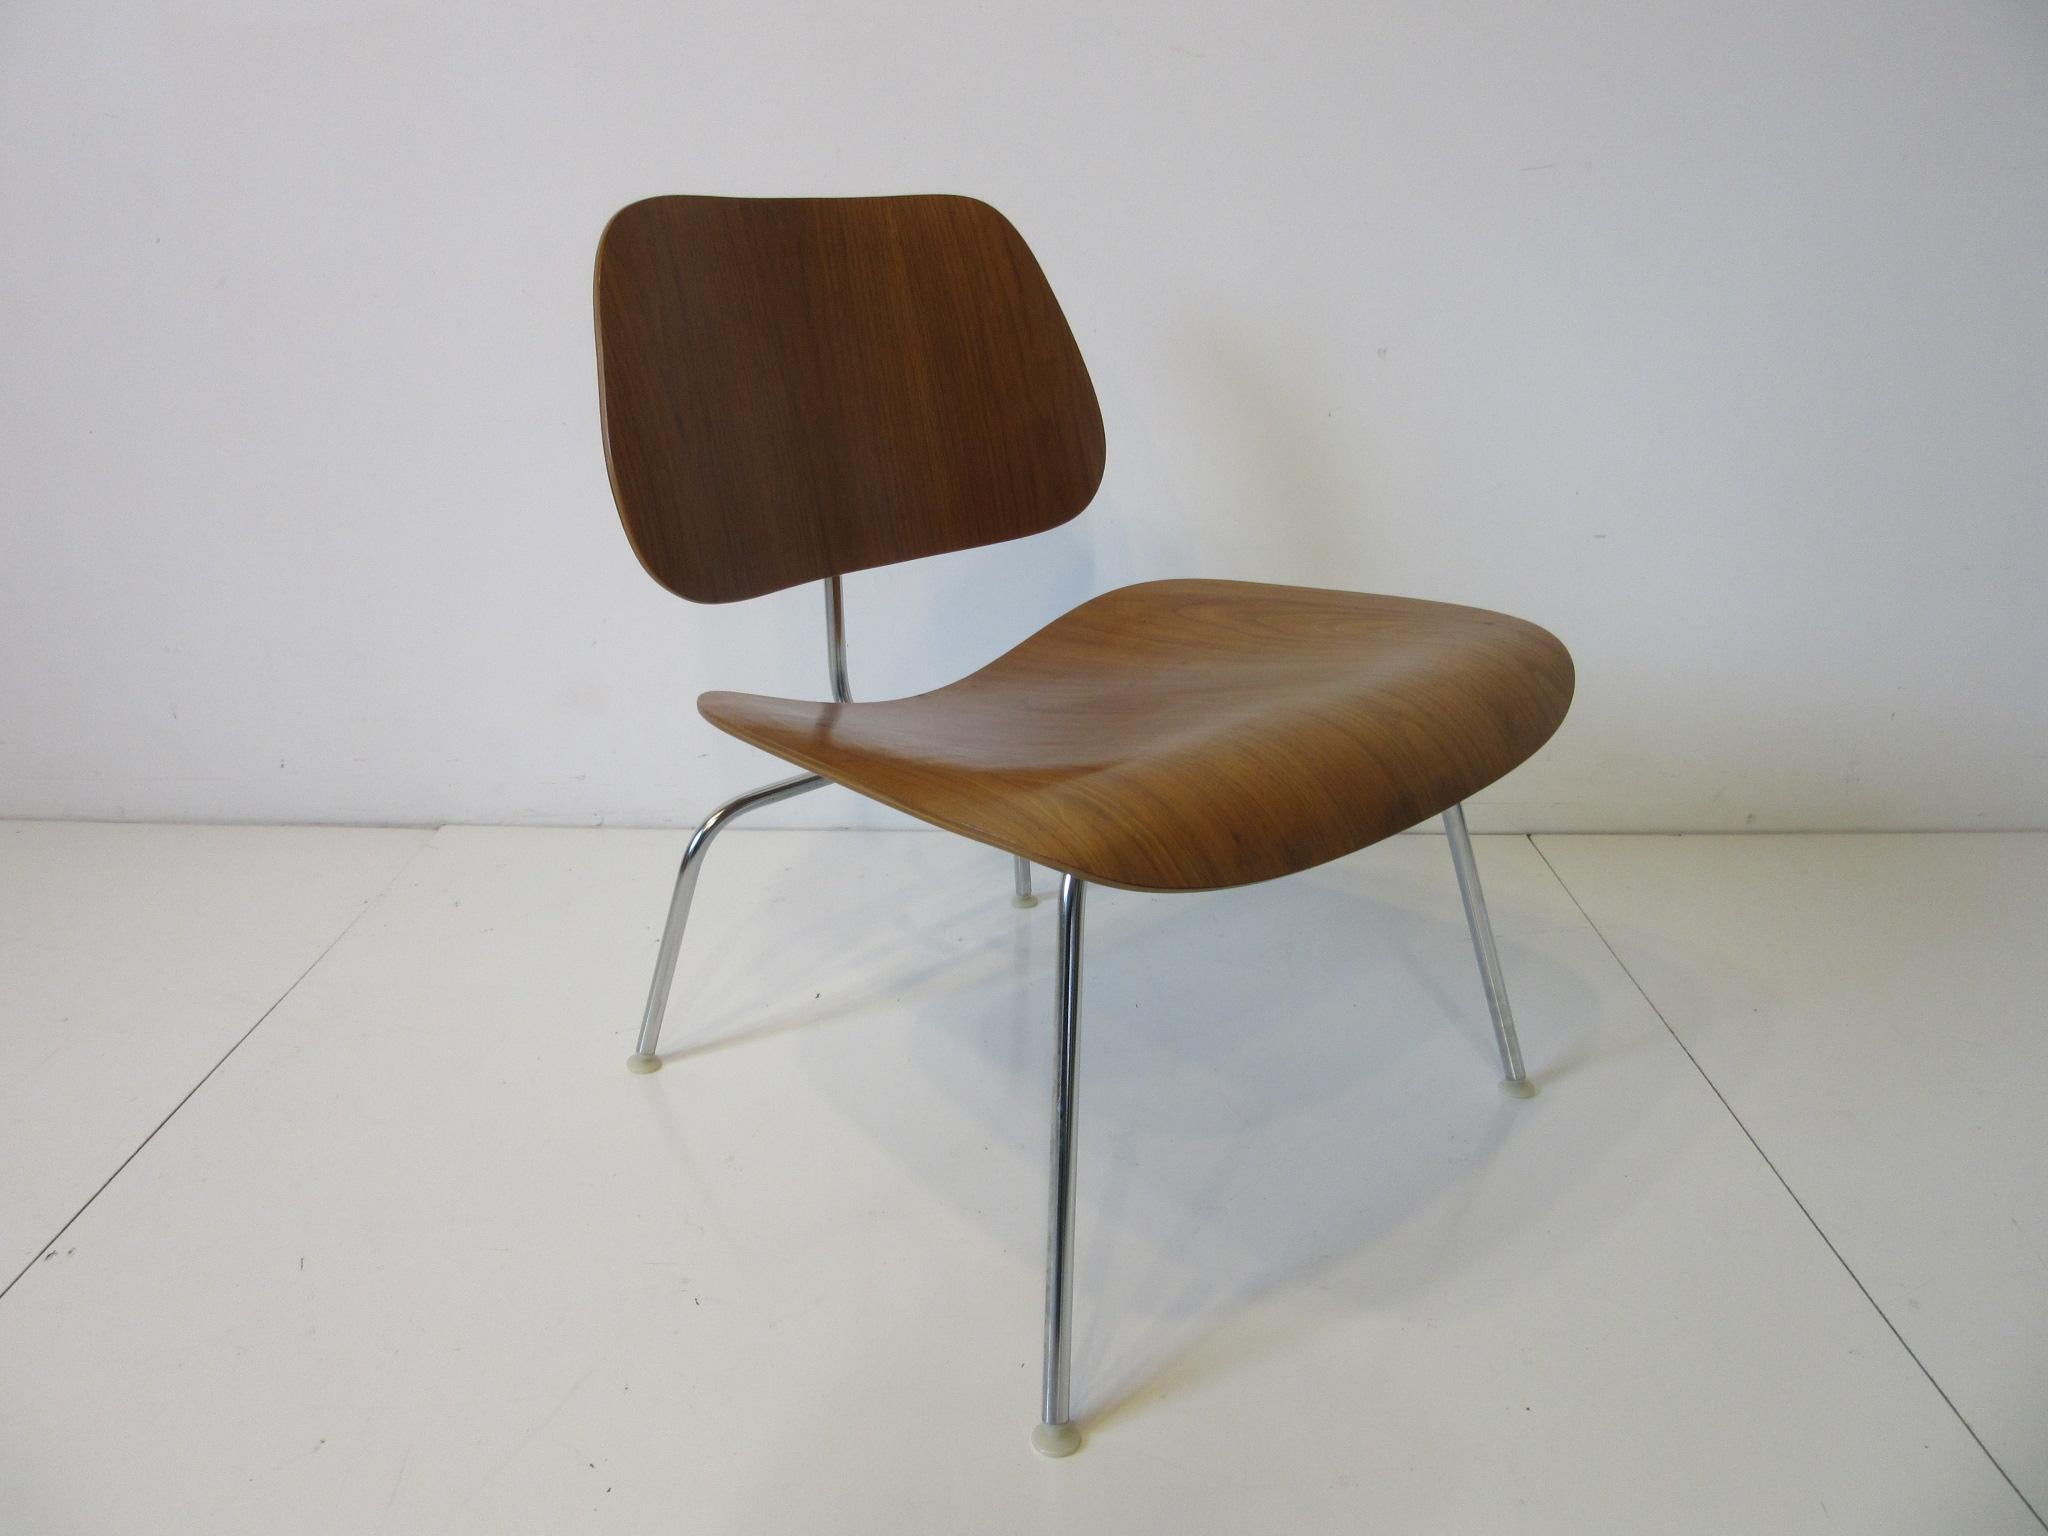 A well grained bent walnut ply LCM (Lounge Chair Metal) chair with nylon foot pads retaining the original manufactures labels from the Herman Miller furniture company. An iconic design with a timeless design that works with any interior.